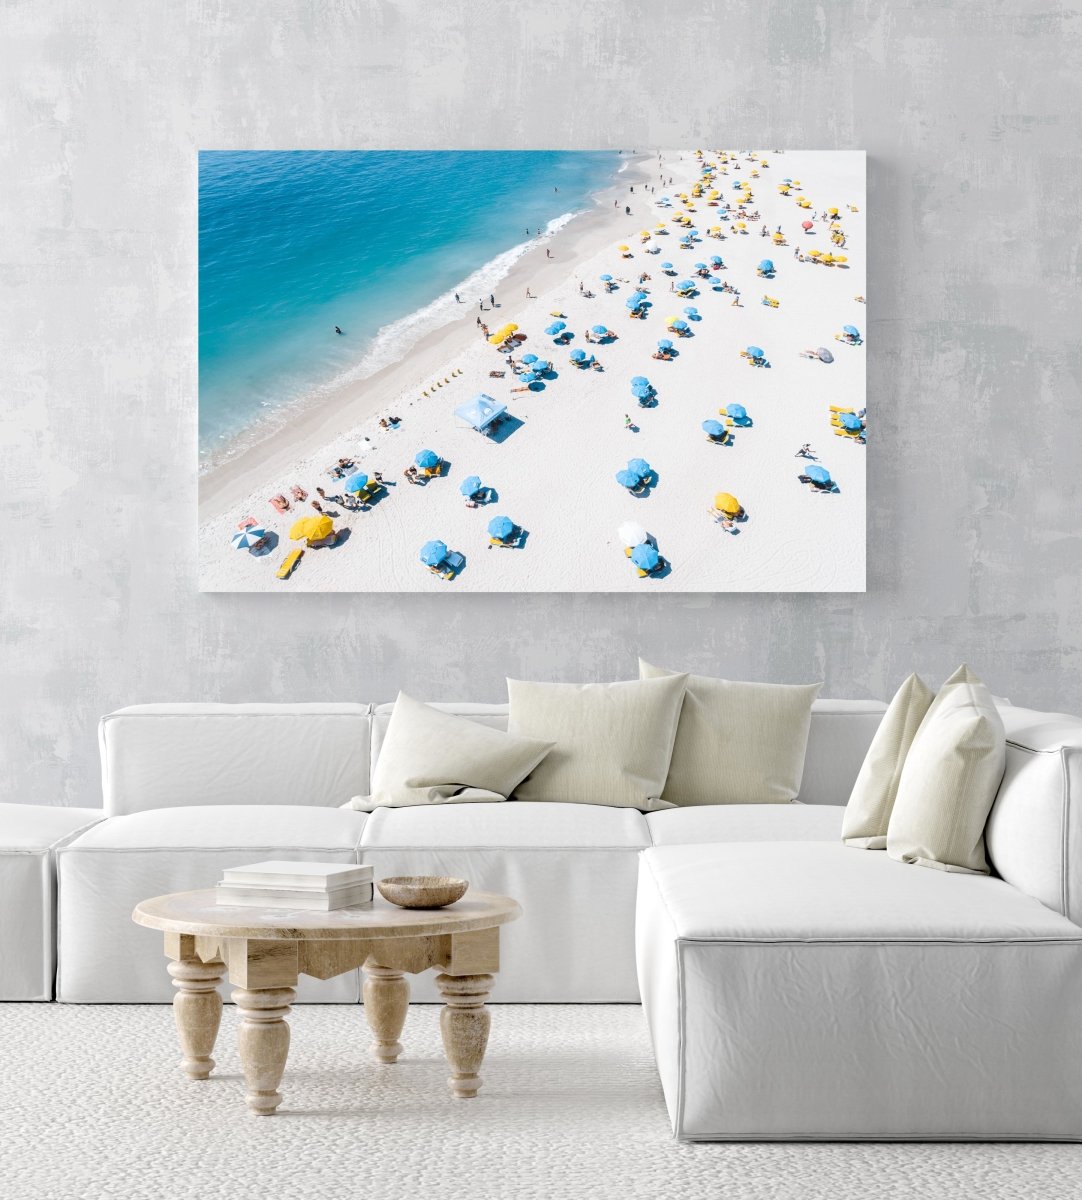 Blue and yellow umbrellas from above on summer day in cape town in an acrylic/perspex frame